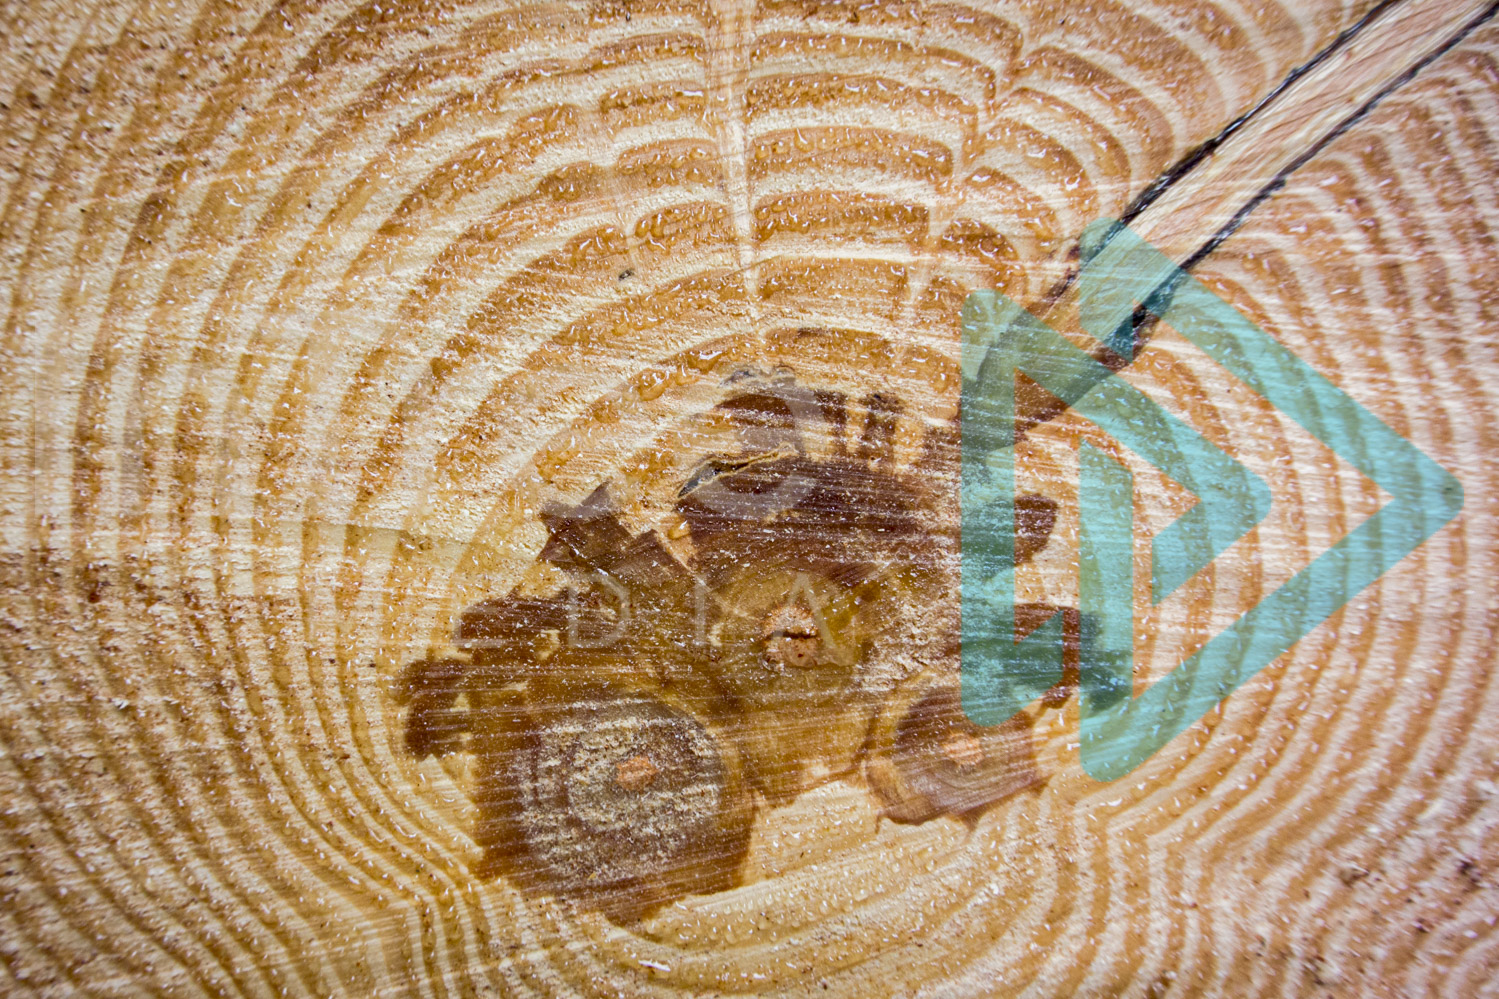 Tree growth rings with patterns InTree arborist image 001-21-9988